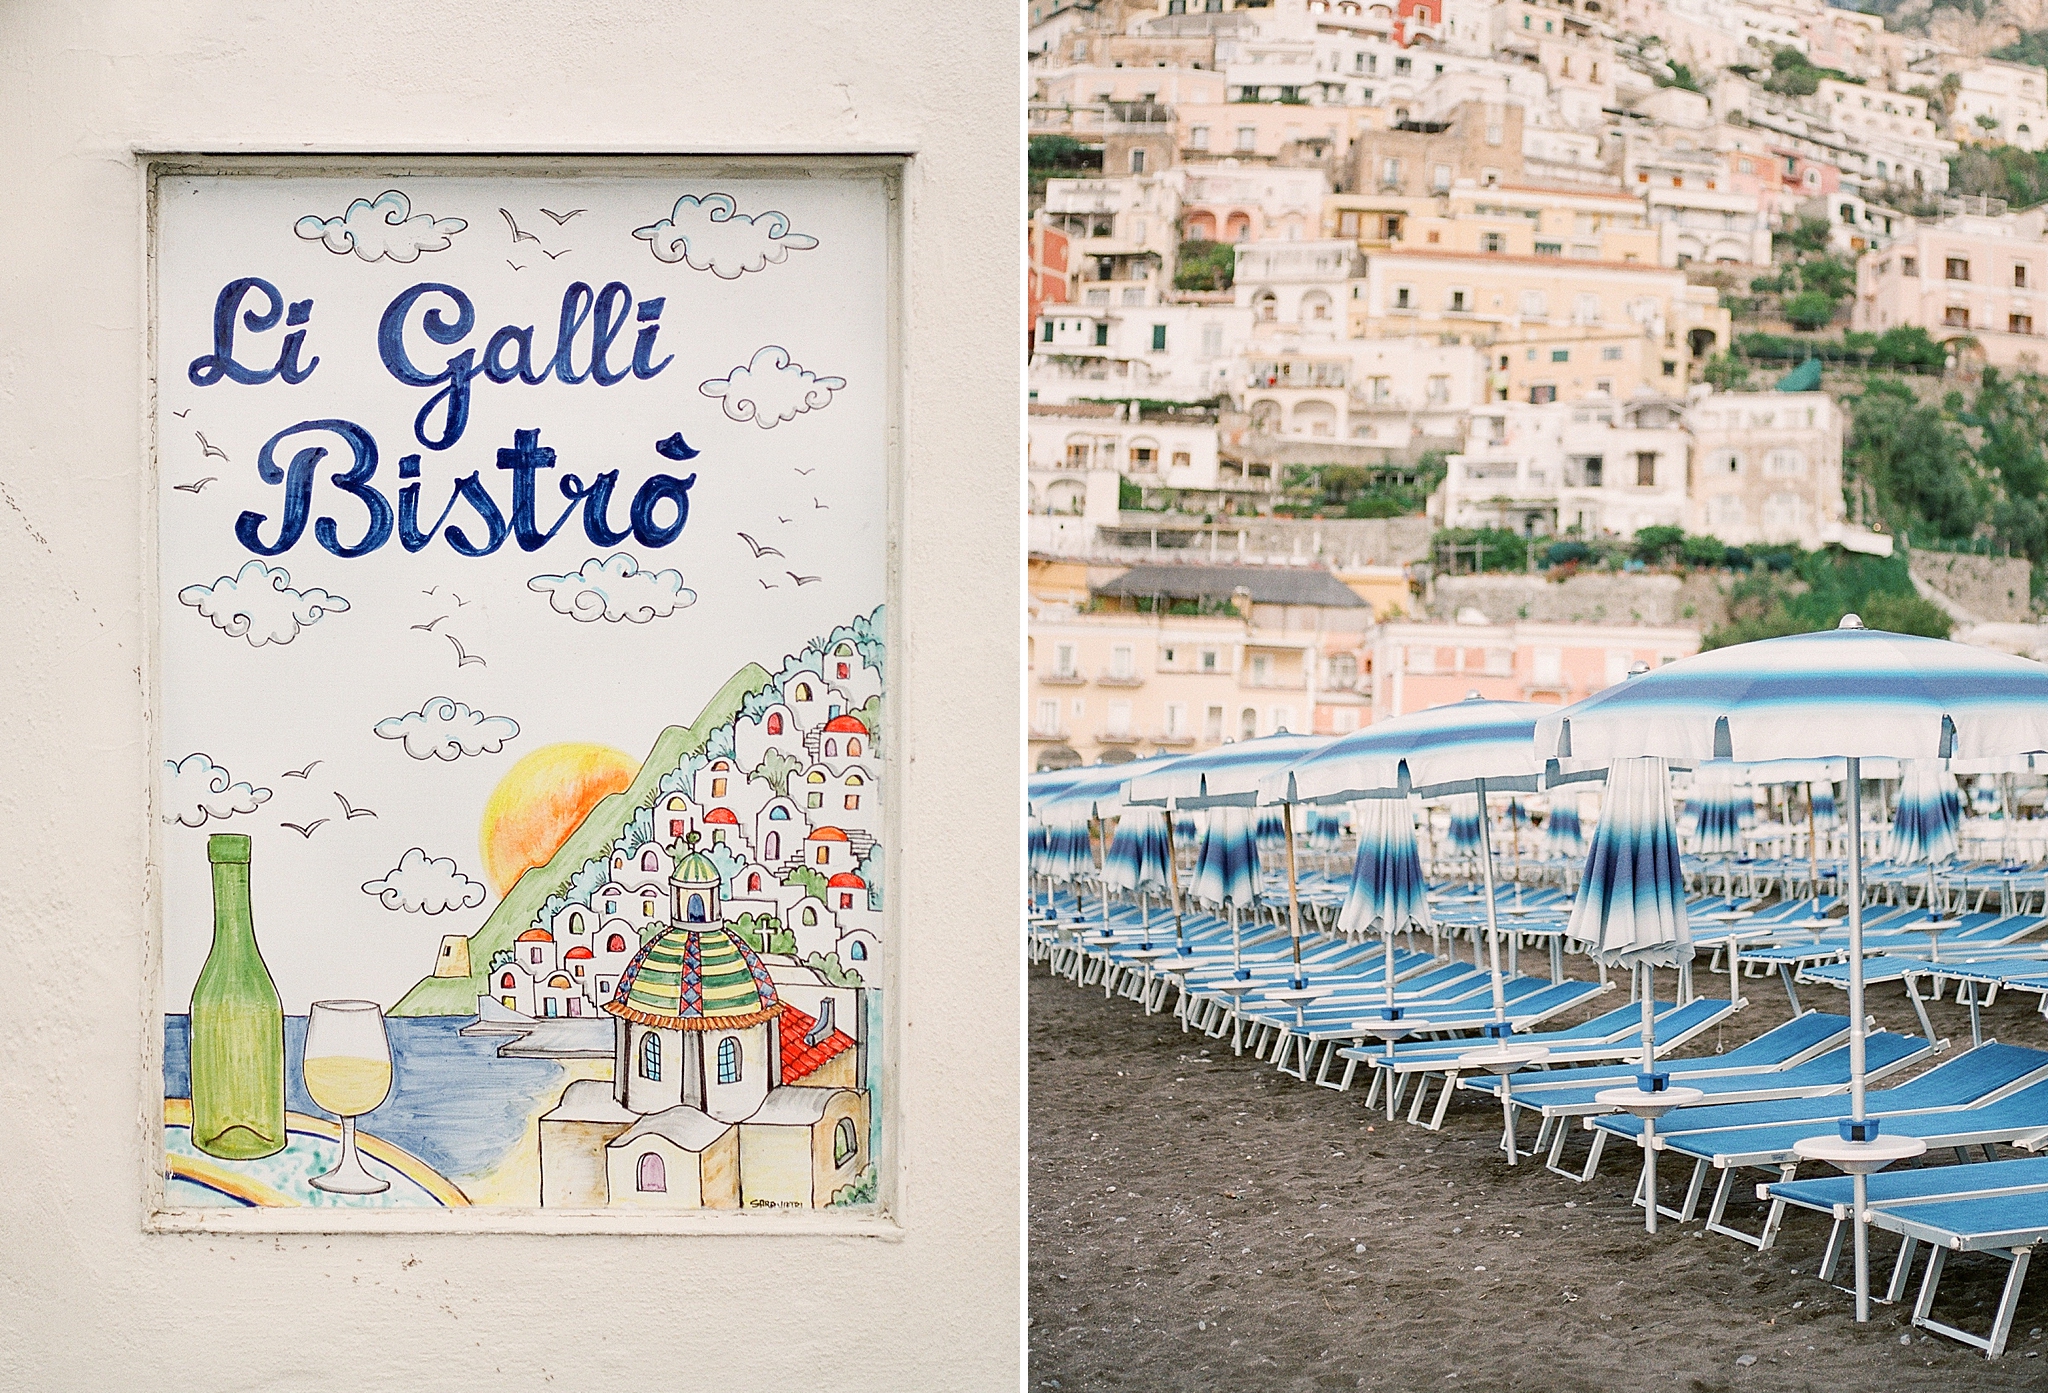 Destination wedding photographer, Alicia Lacey, travels to Amalfi Coast to photography highlights on film, including Positano and Villa Cimbrone in Ravello.